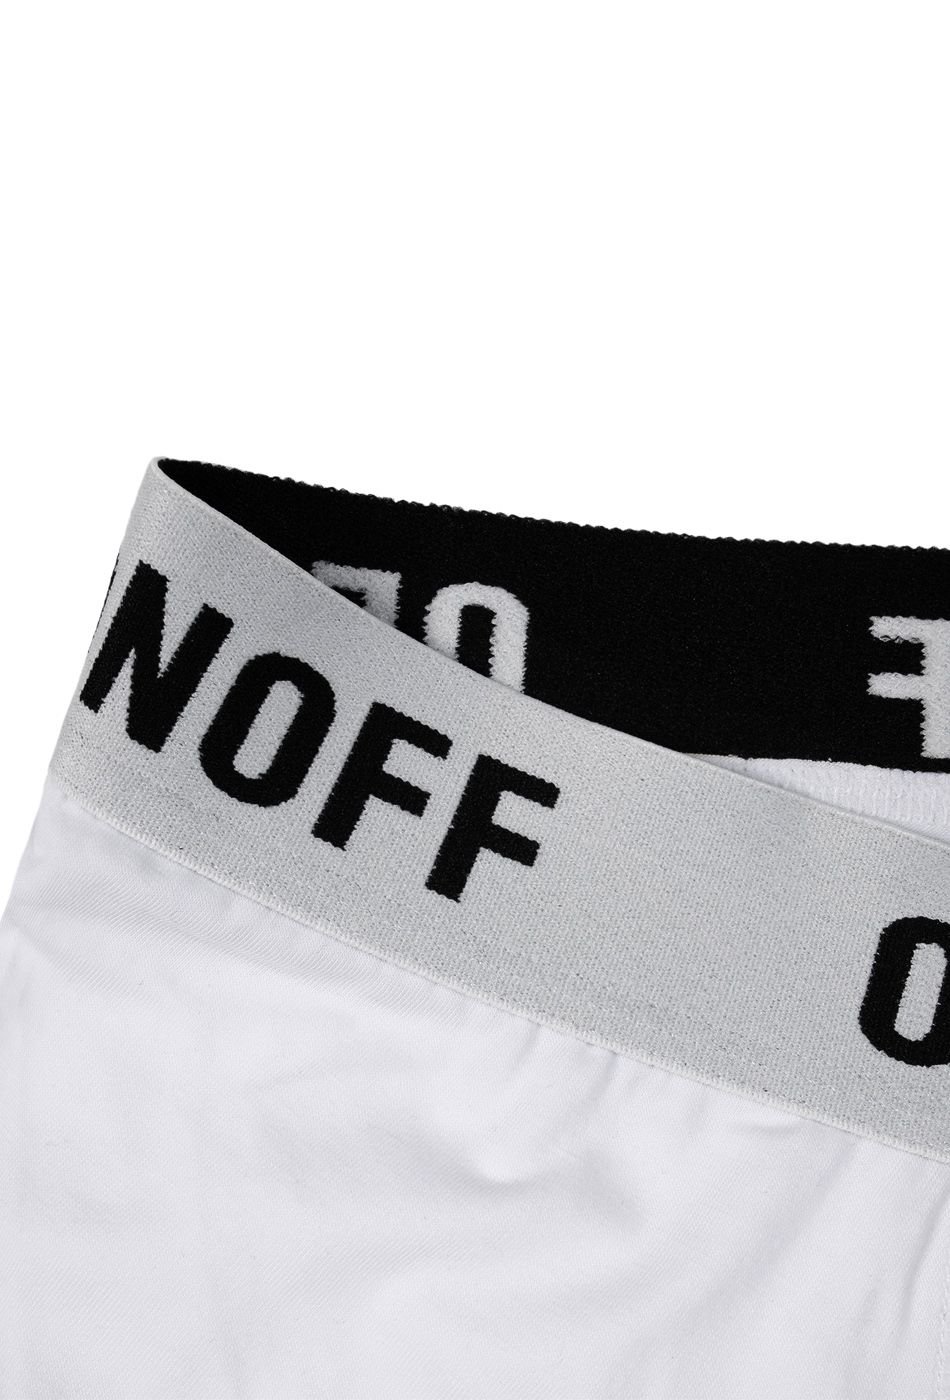  OFFONOFF BOXER / WHITE 